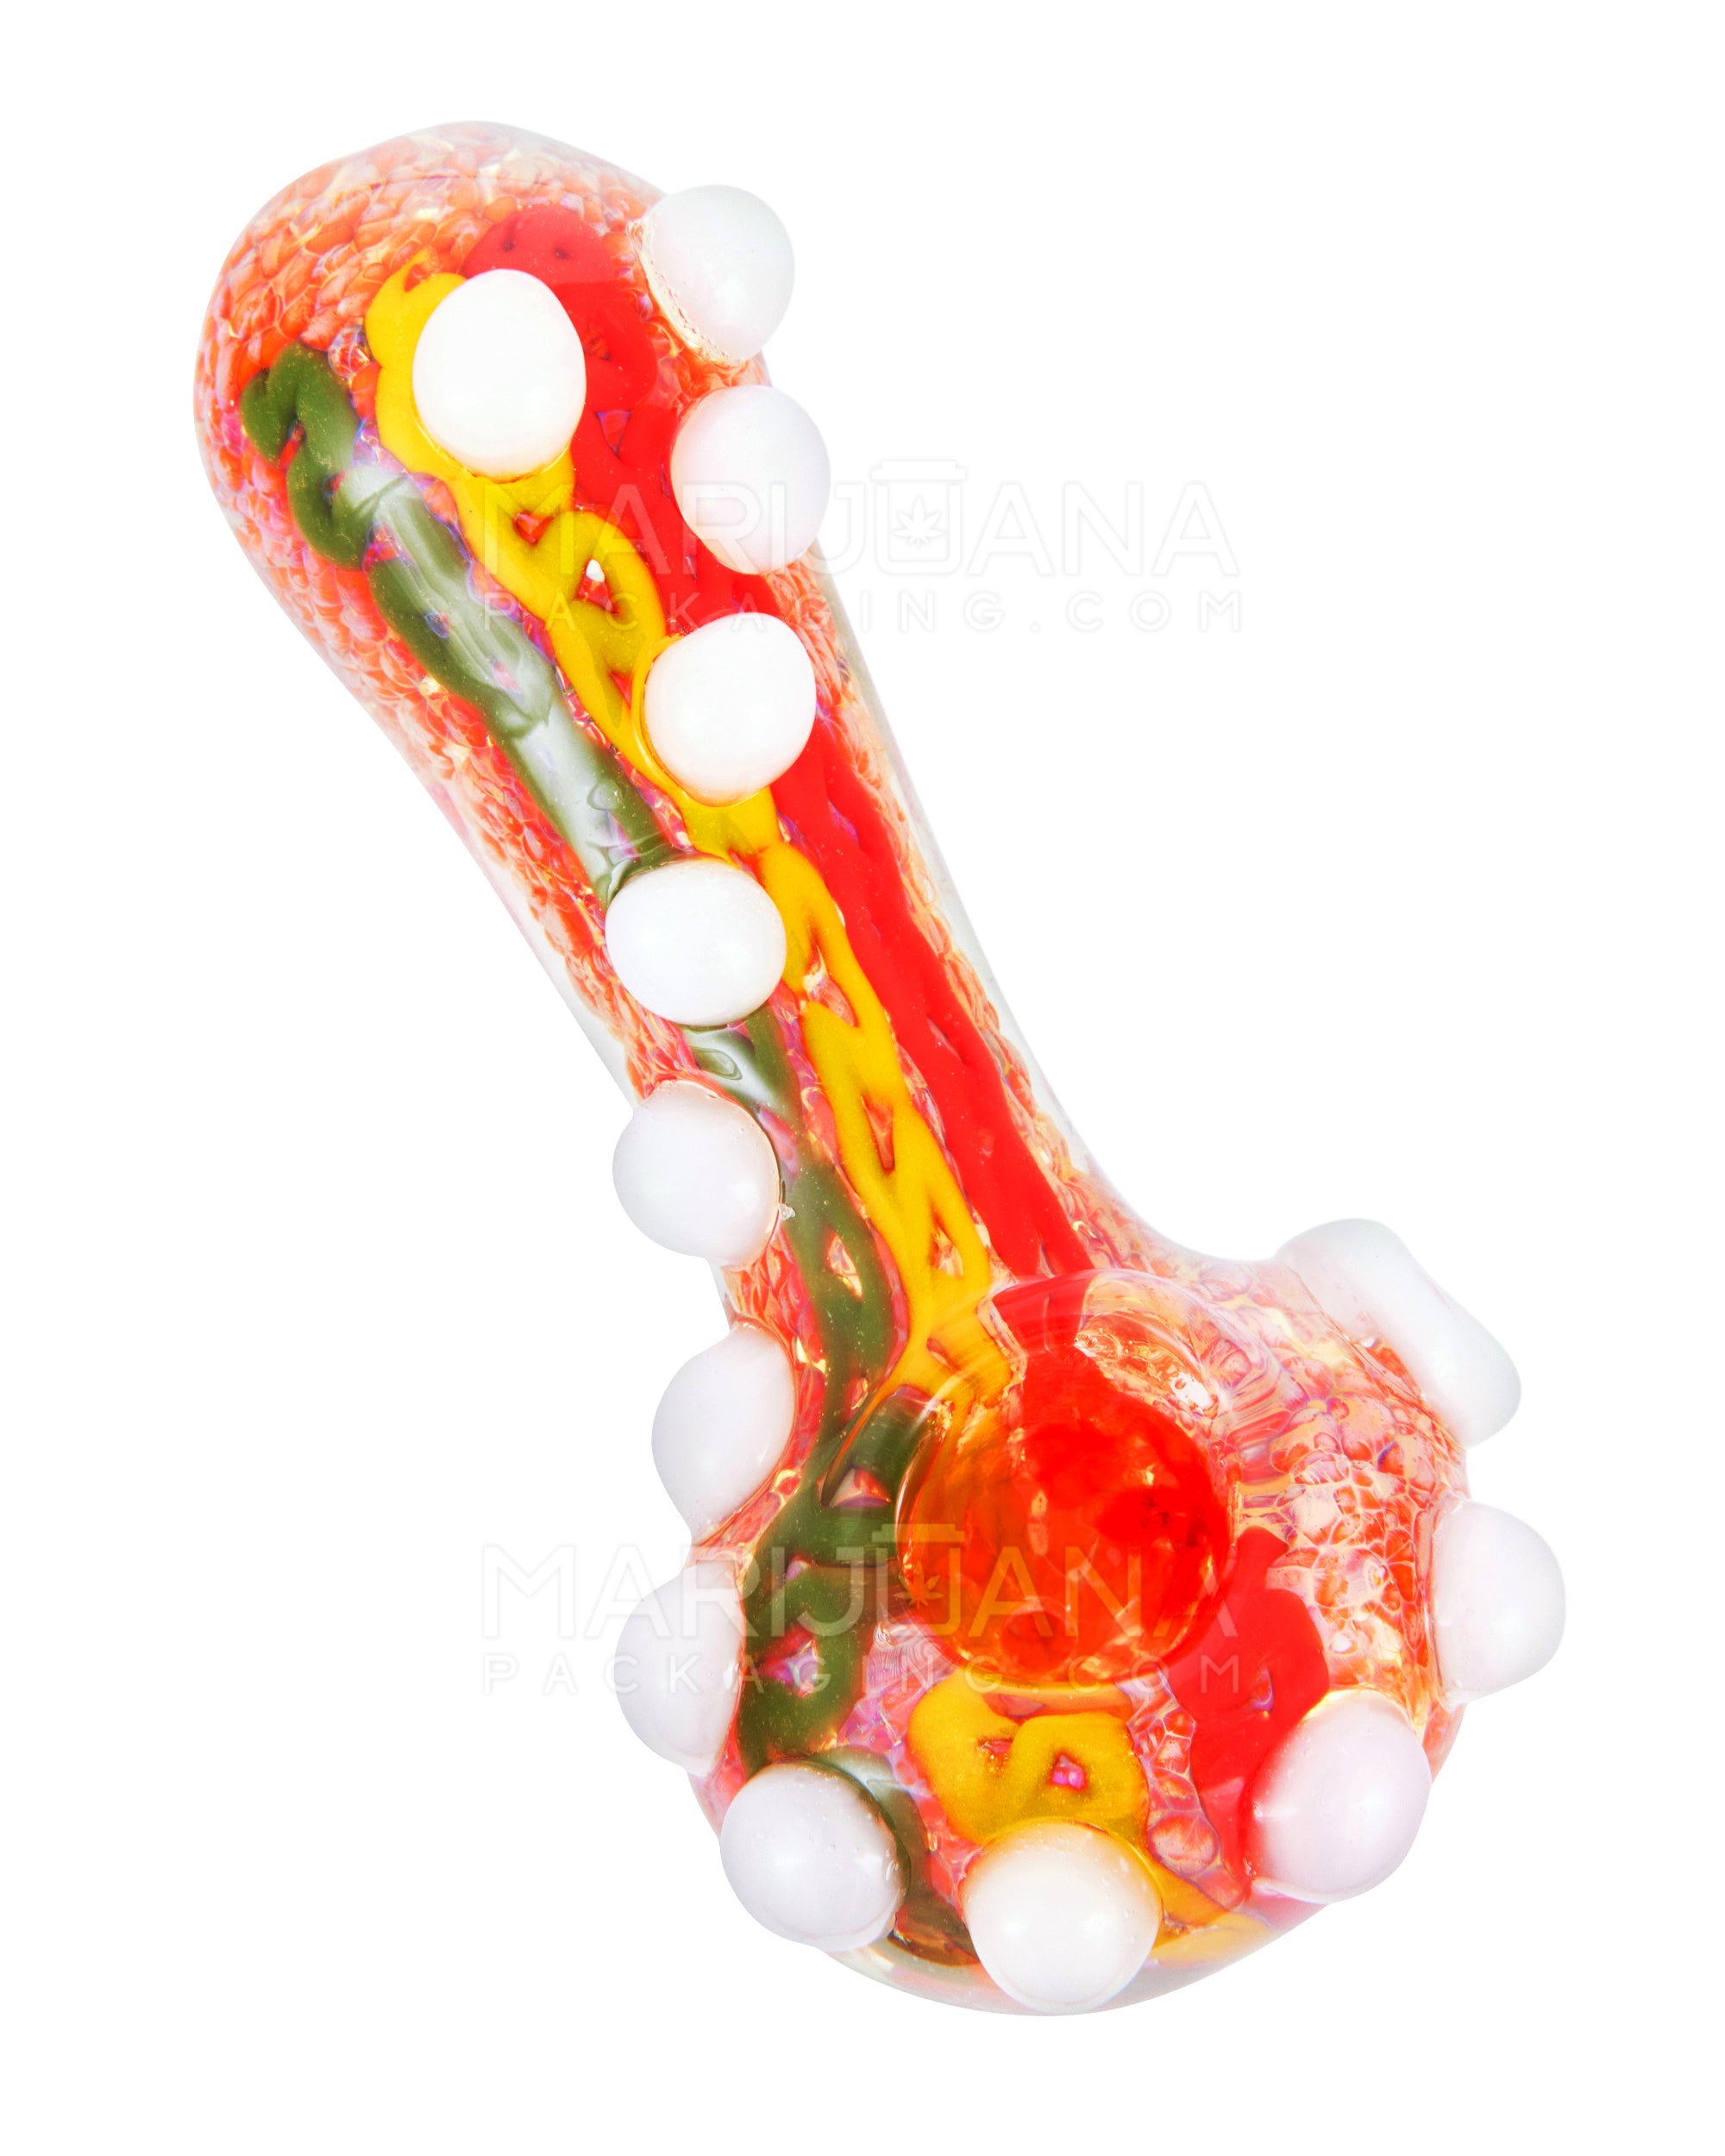 Frit Spoon Hand Pipe w/ Rasta Stripes & Multi Knockers | 4.5in Long - Glass - Assorted - 6